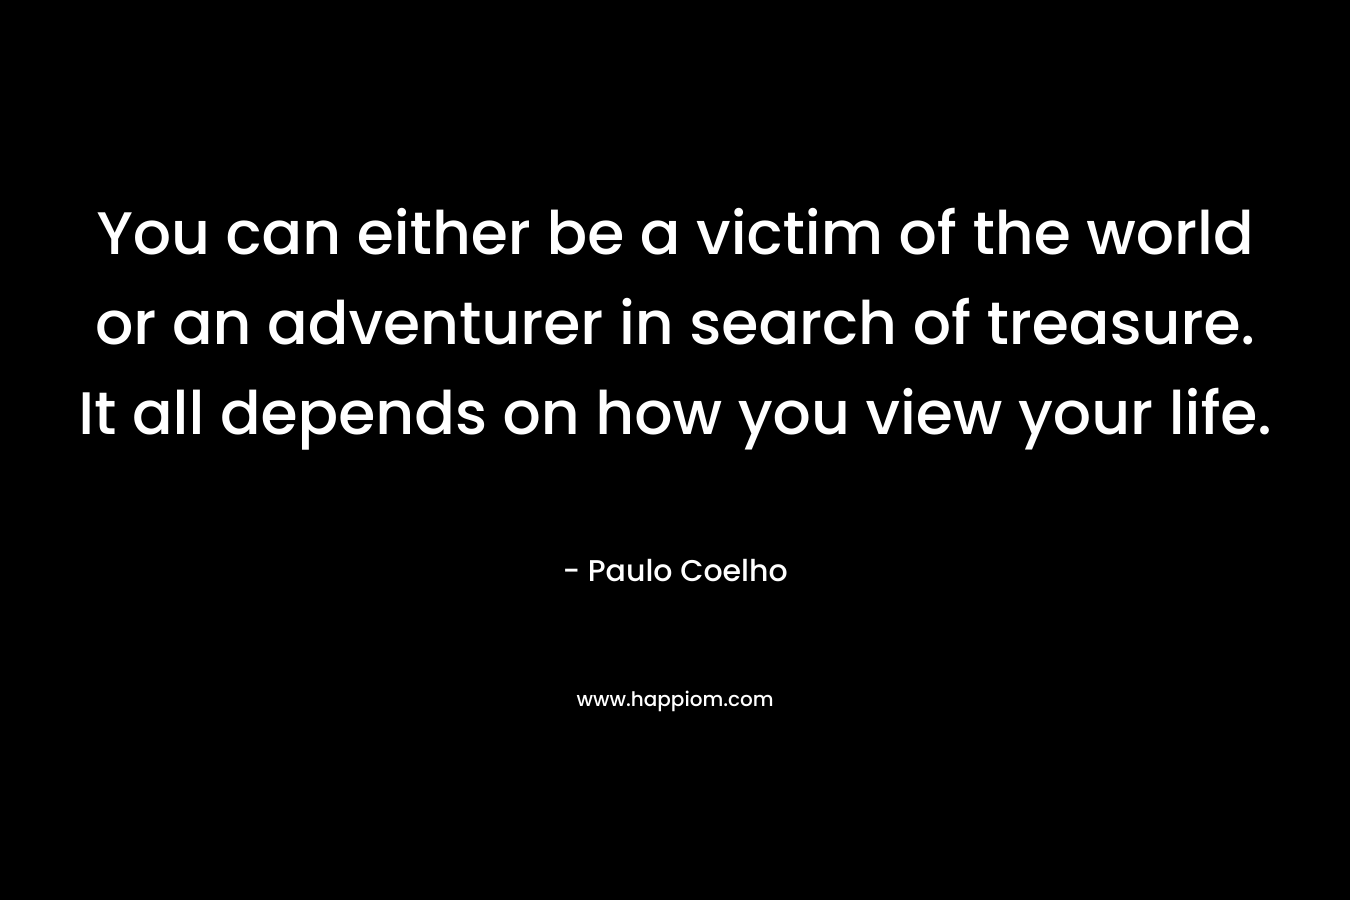 You can either be a victim of the world or an adventurer in search of treasure. It all depends on how you view your life.